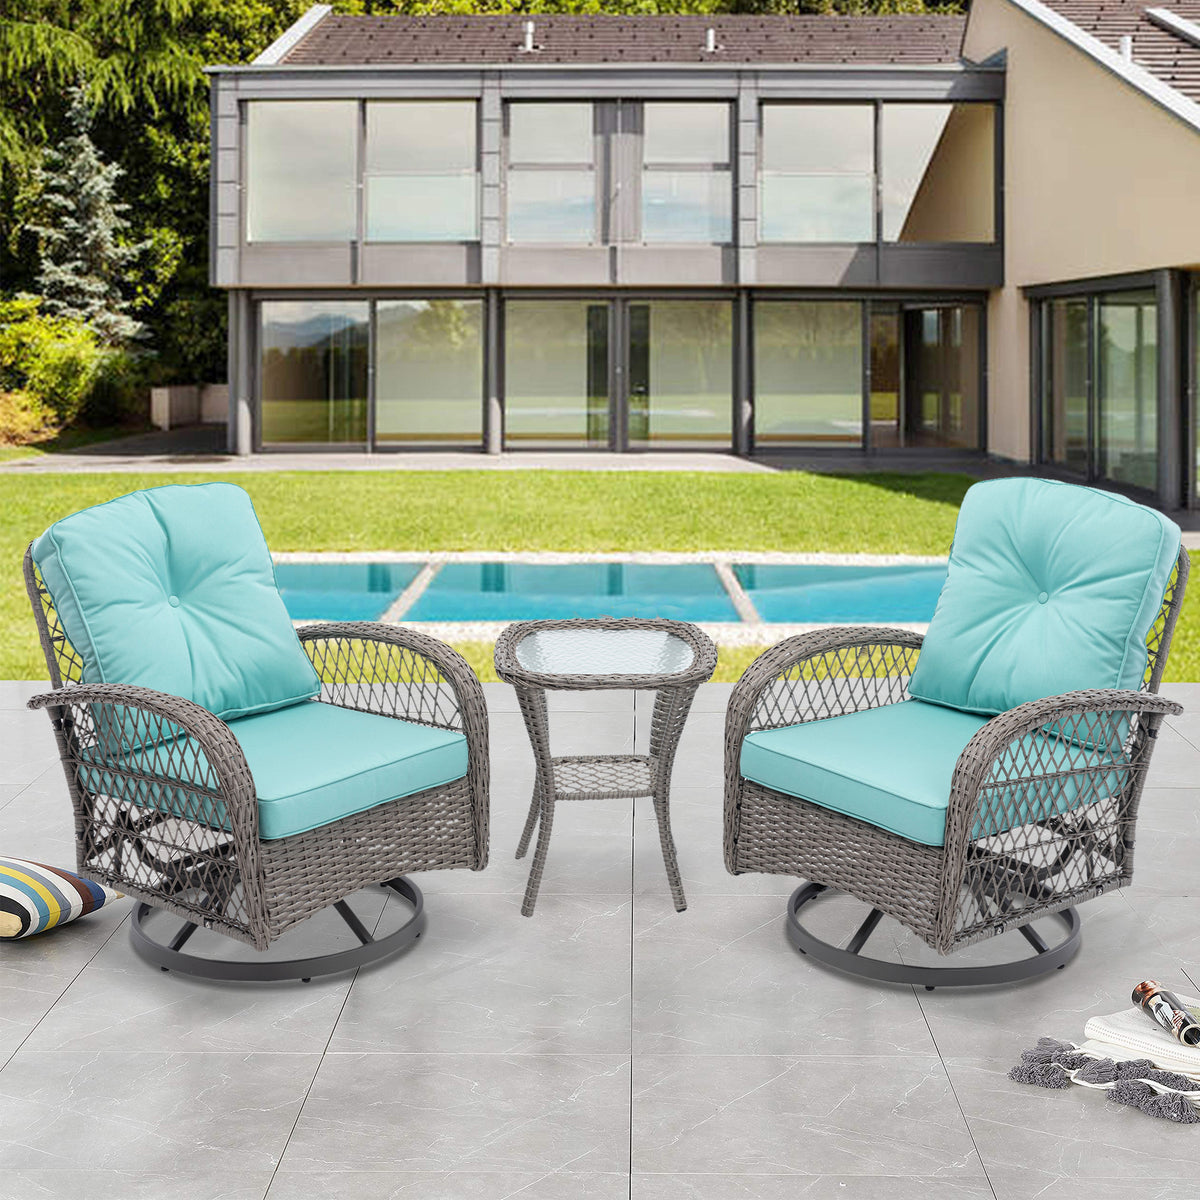 3 Pcs Outdoor Wicker Swivel Chair Set With Coffee Table and Cushions